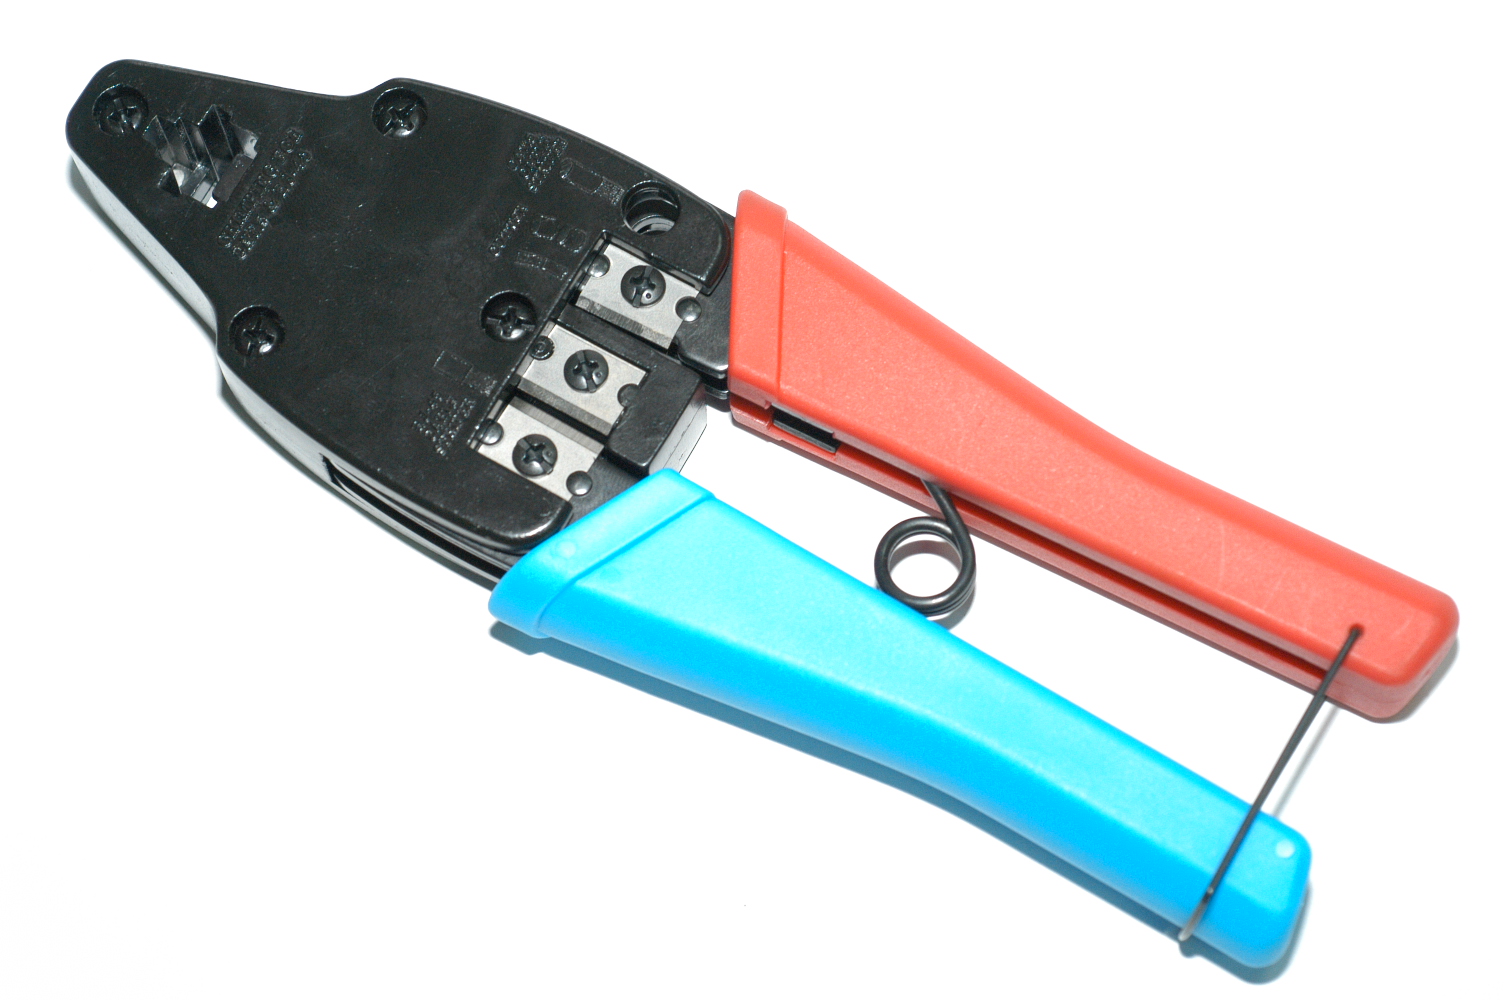 Telephone Stripping/Crimping/Cutting Tool (Telefon Stripping / Crimp / Cutting Tool)